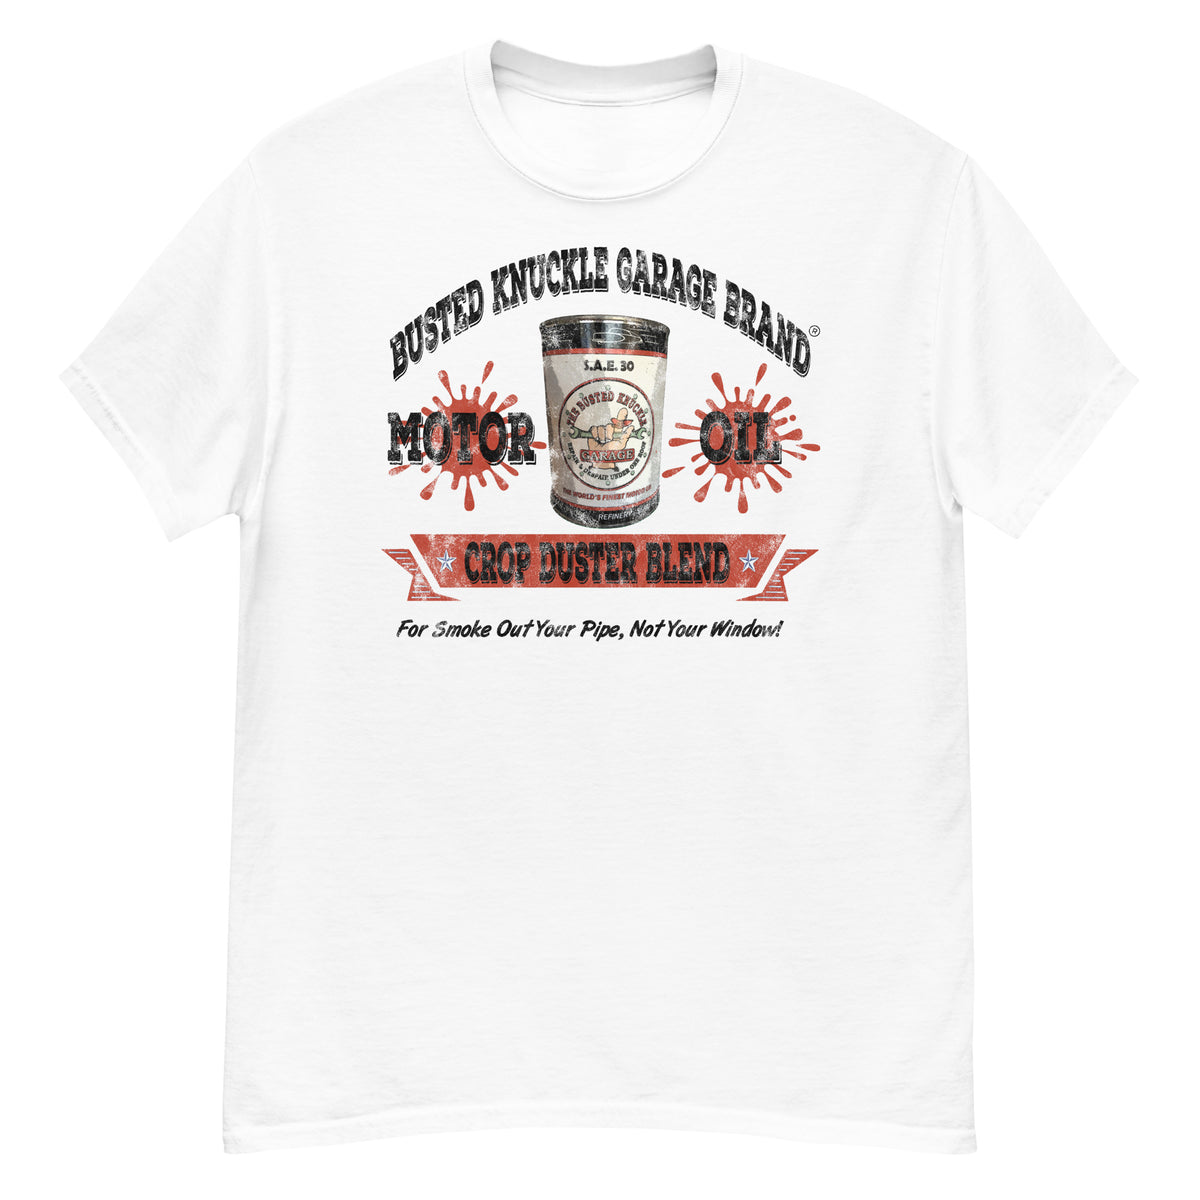 Busted Knuckle Garage Heavyweight Motor Oil Carguy T-Shirt